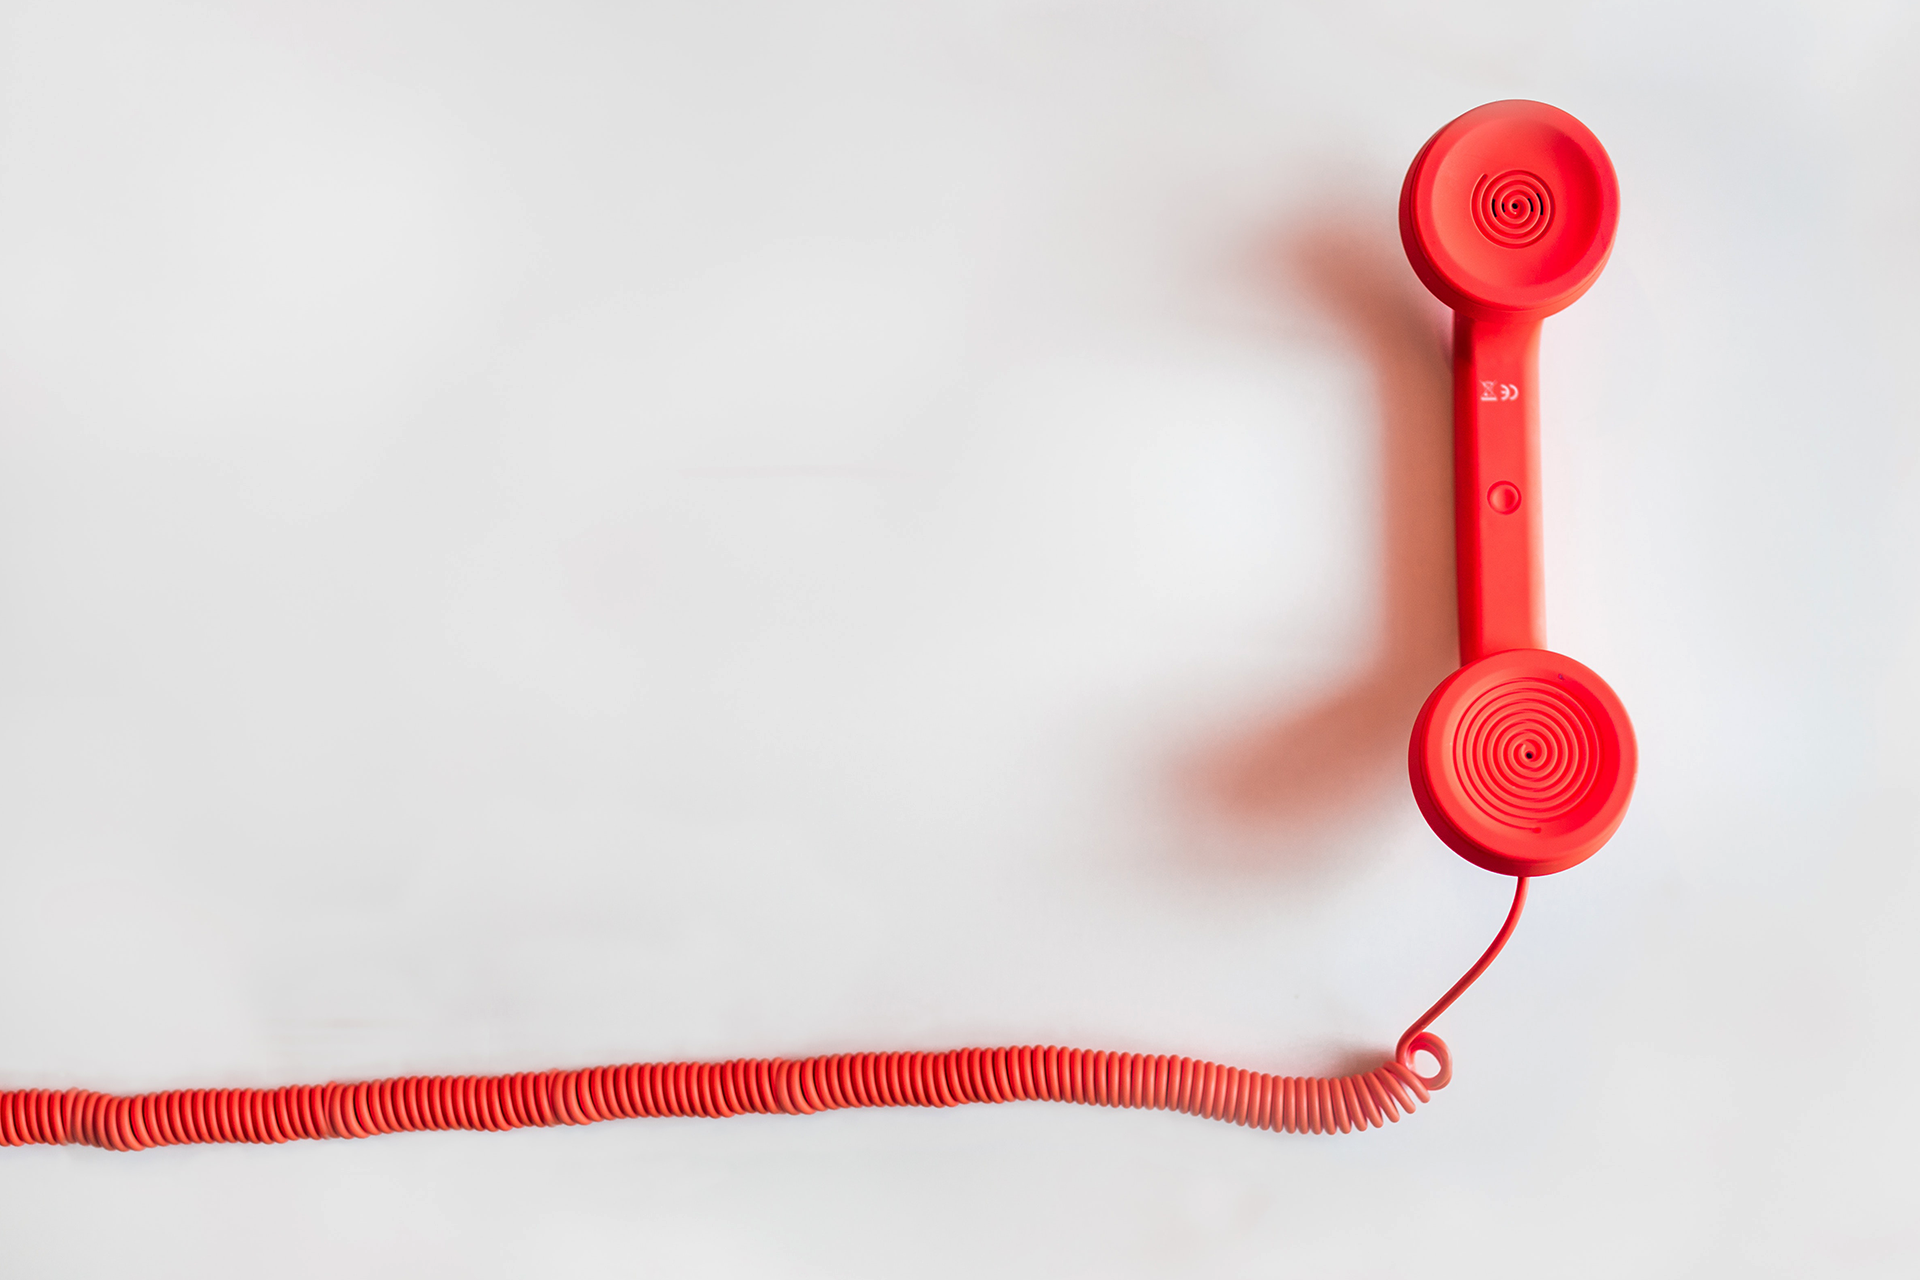 Red telephone against a white background